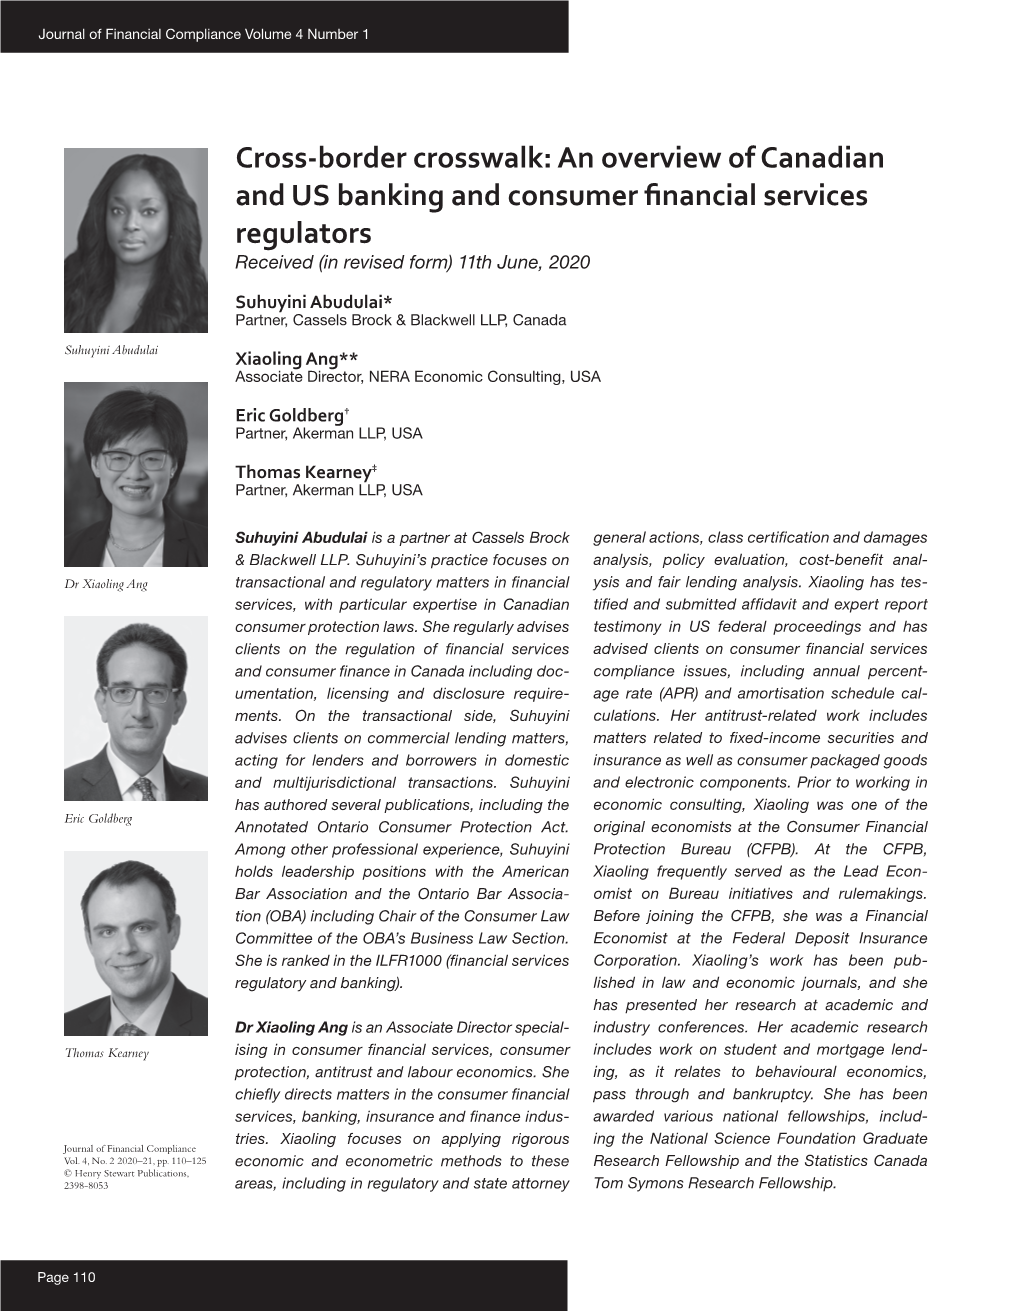 Cross-Border Crosswalk: an Overview of Canadian and US Banking and Consumer Financial Services Regulators